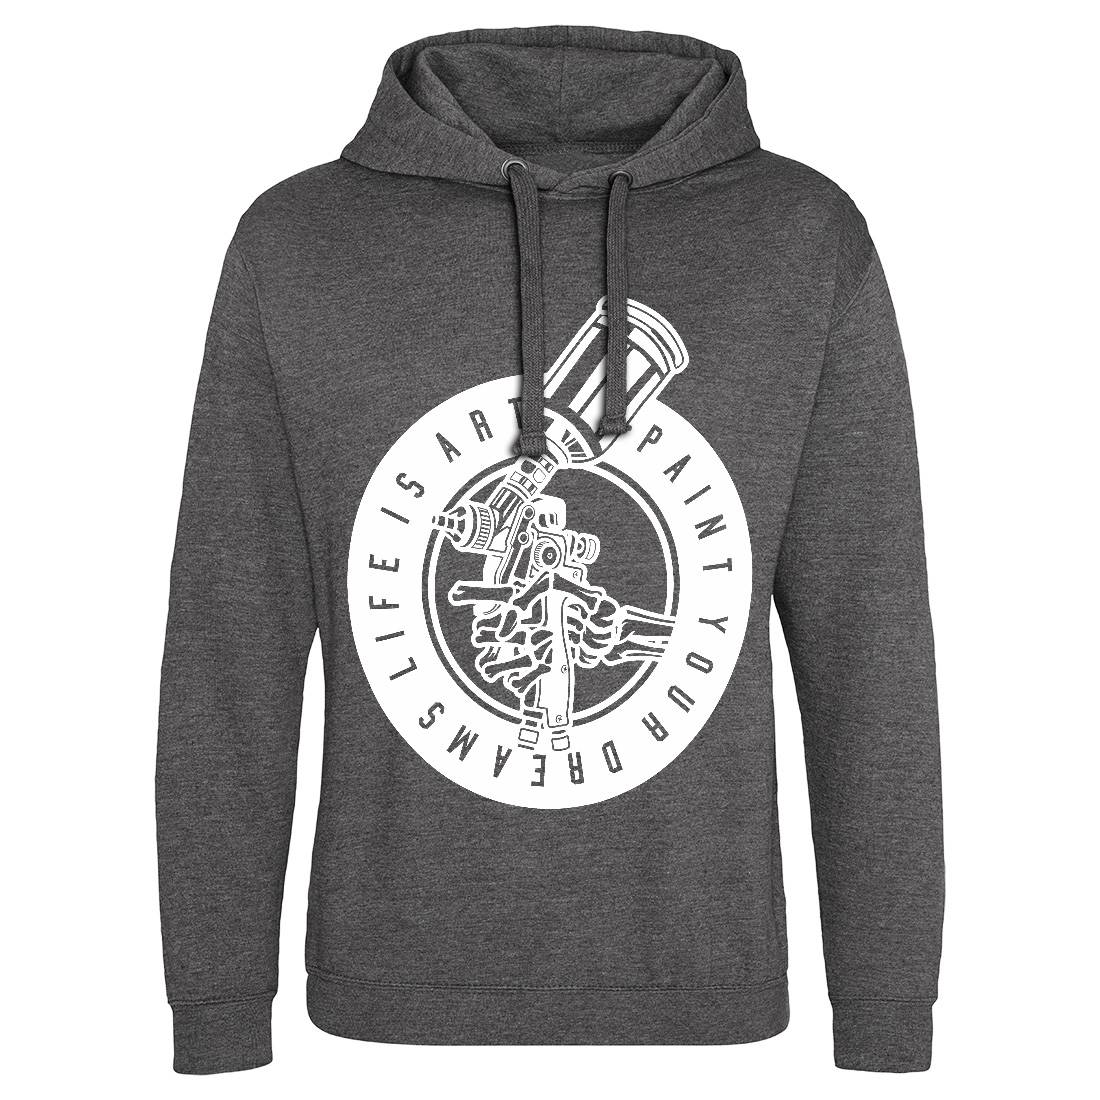 Paint Your Dreams Mens Hoodie Without Pocket Retro B595